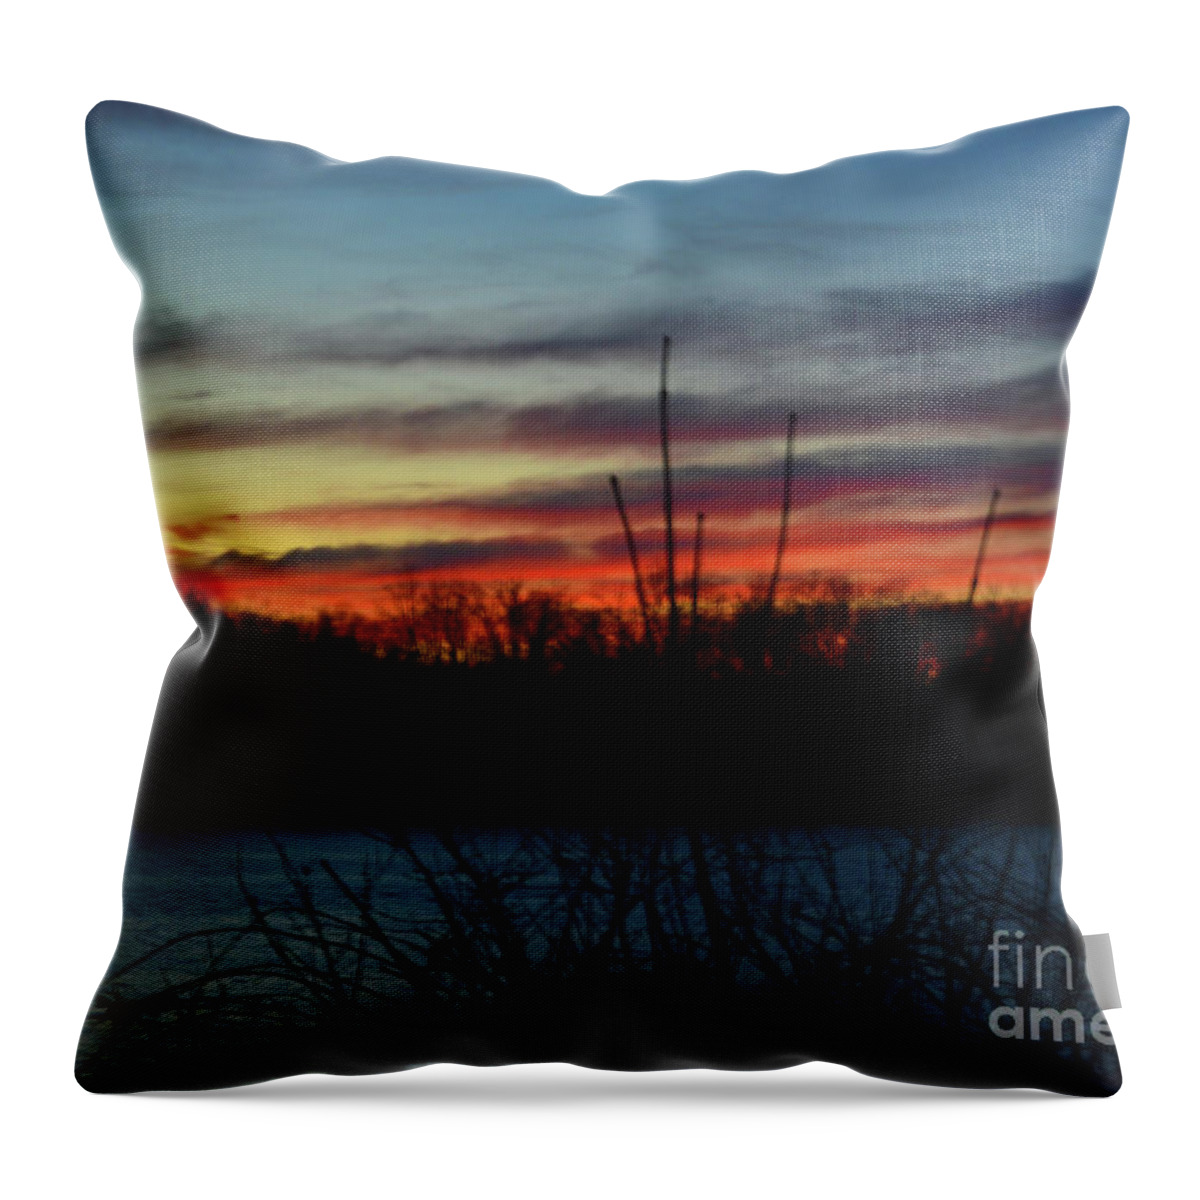 America Throw Pillow featuring the photograph Waiting For The Sun by Robyn King